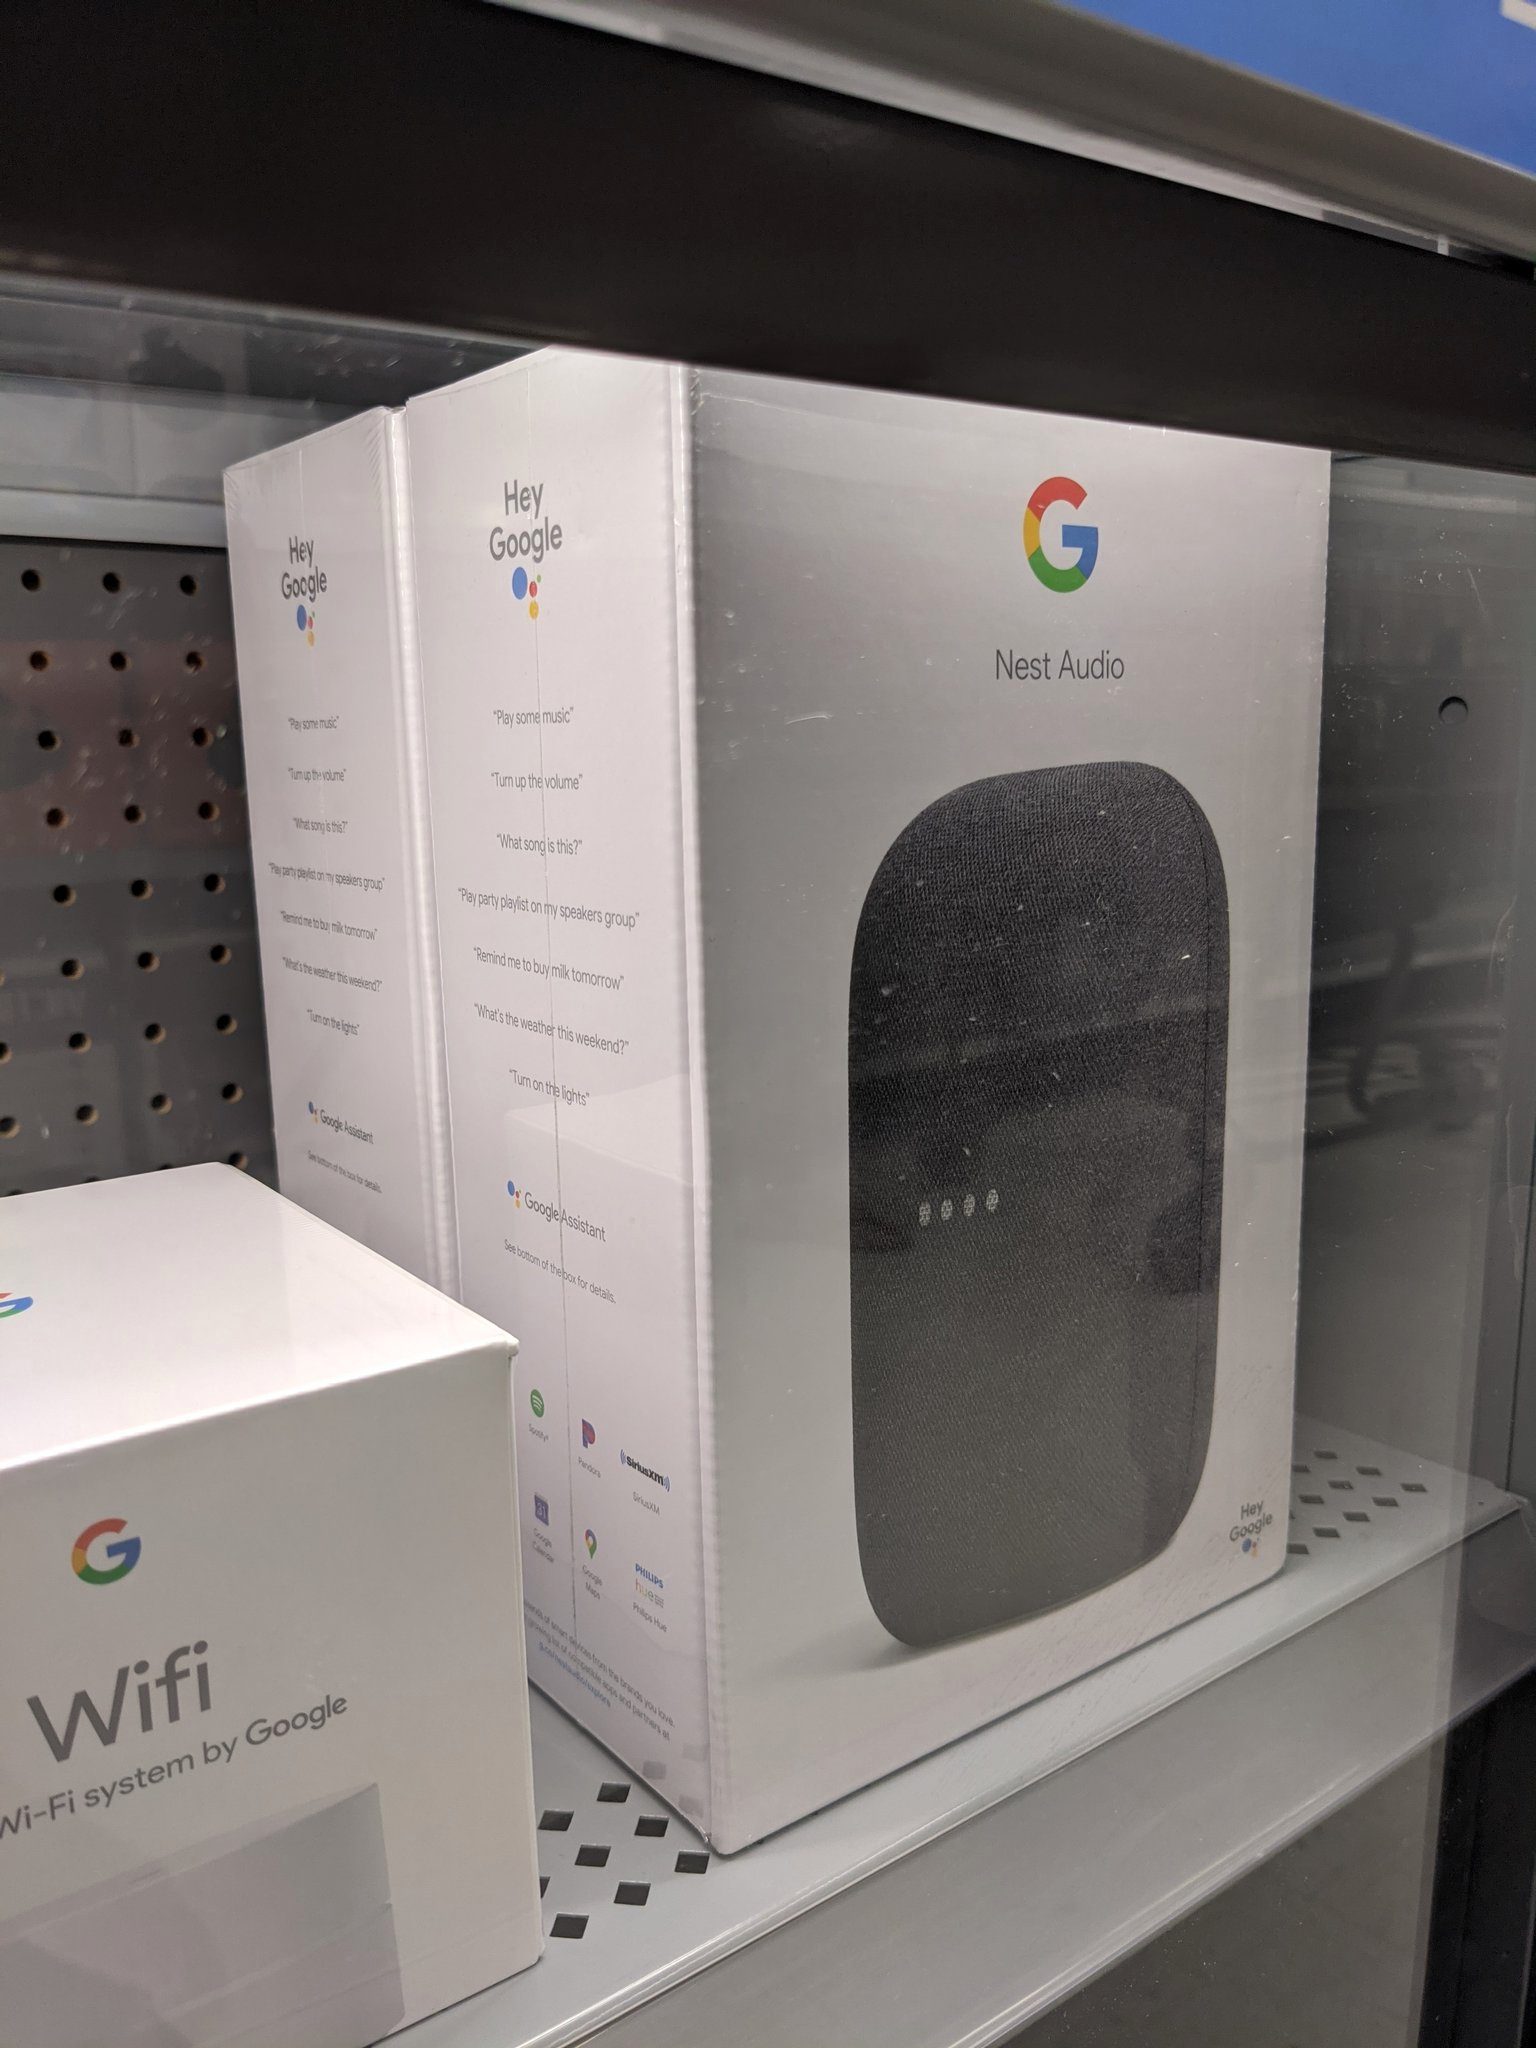 Here's the retail packaging for Nest Audio, Chromecast with Google TV thumbnail